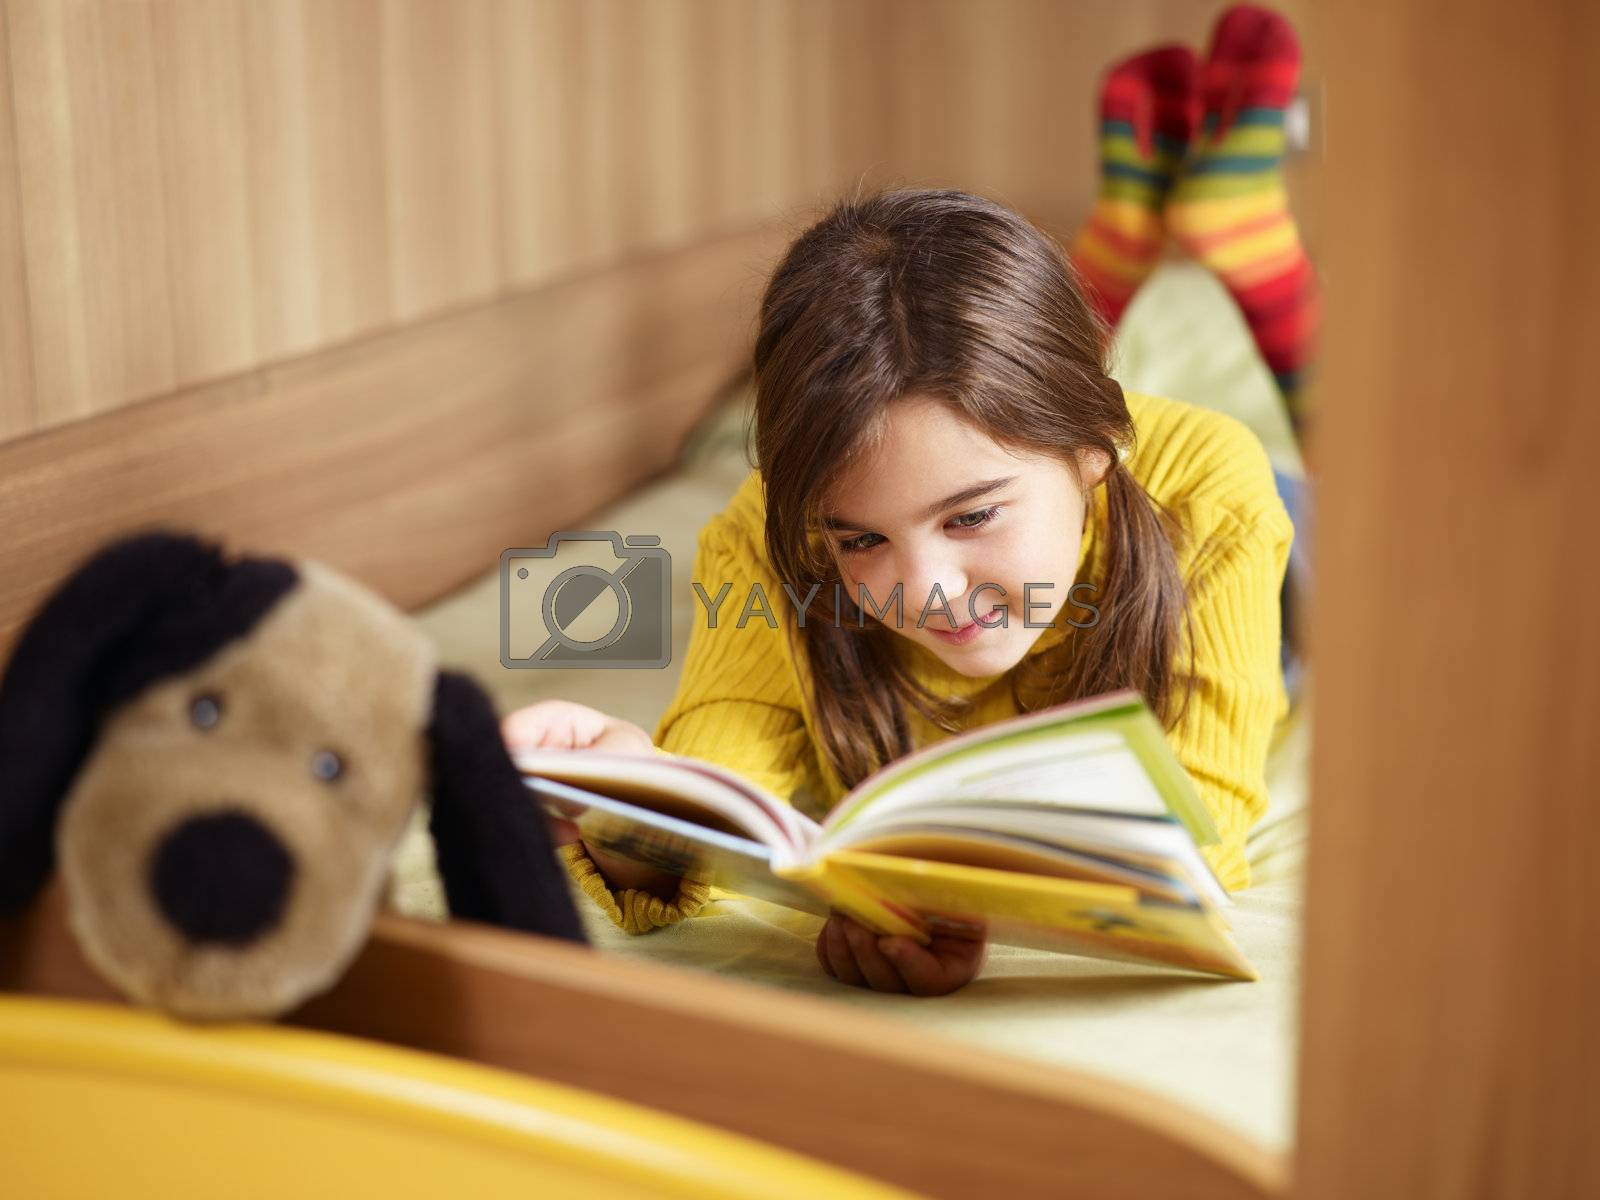 Royalty free image of girl reading book  by diego_cervo